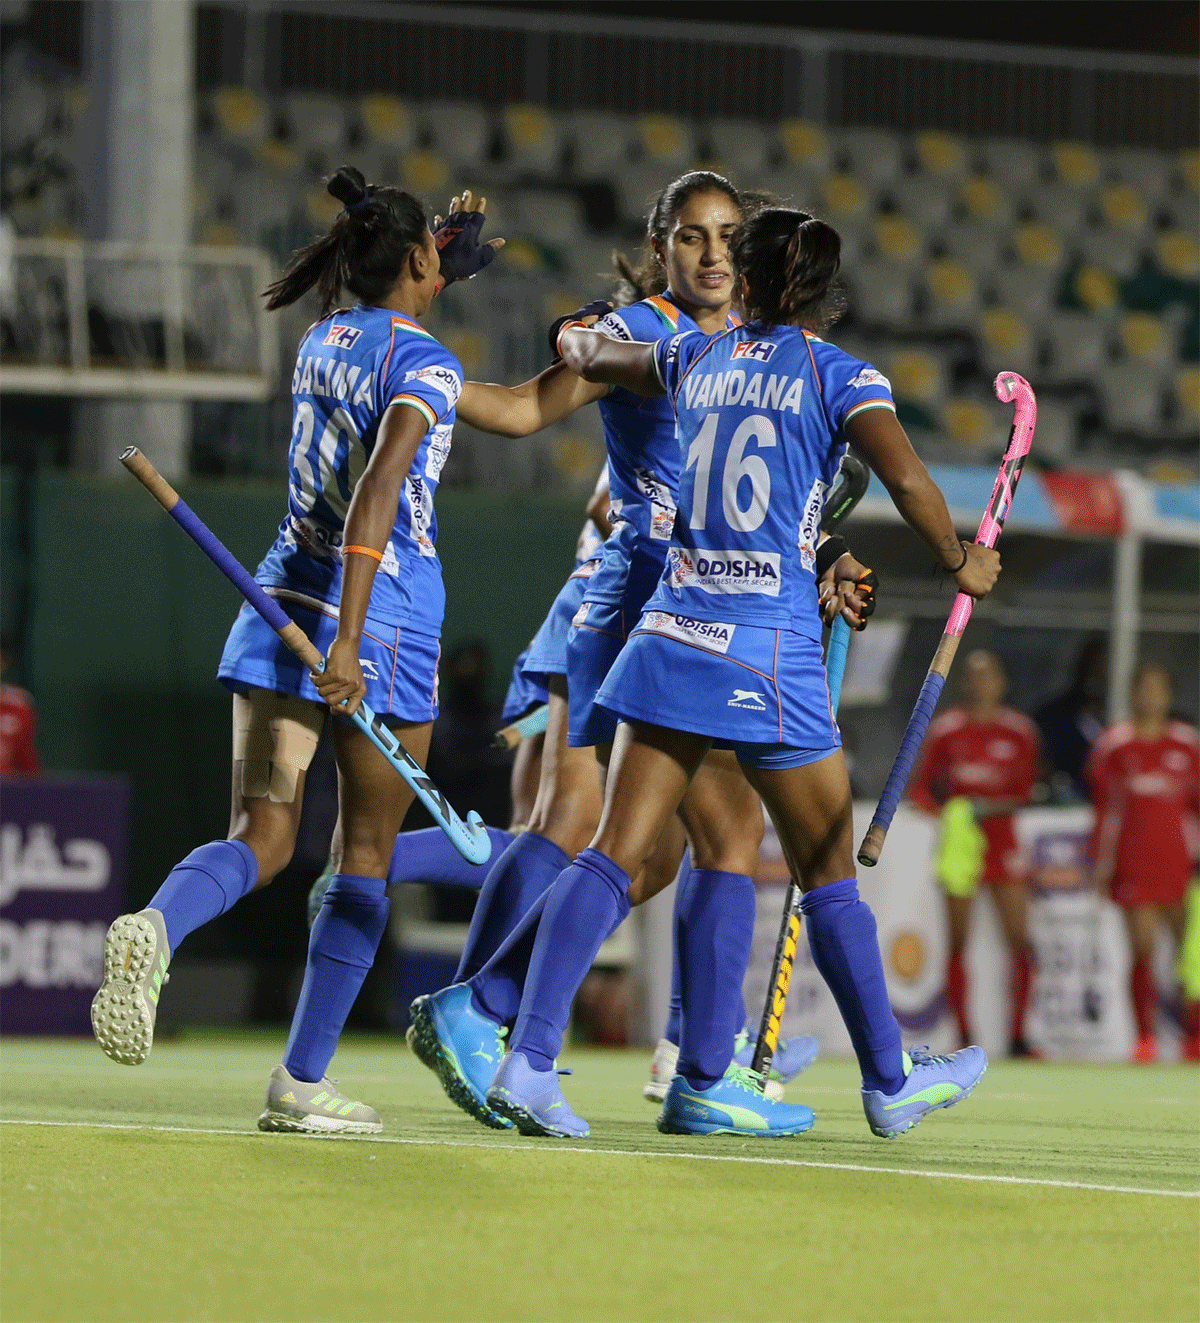 India players celebrate a goal in their 9-1 win over Singapore in their Asia Cup hockey match in Muscat on Monday